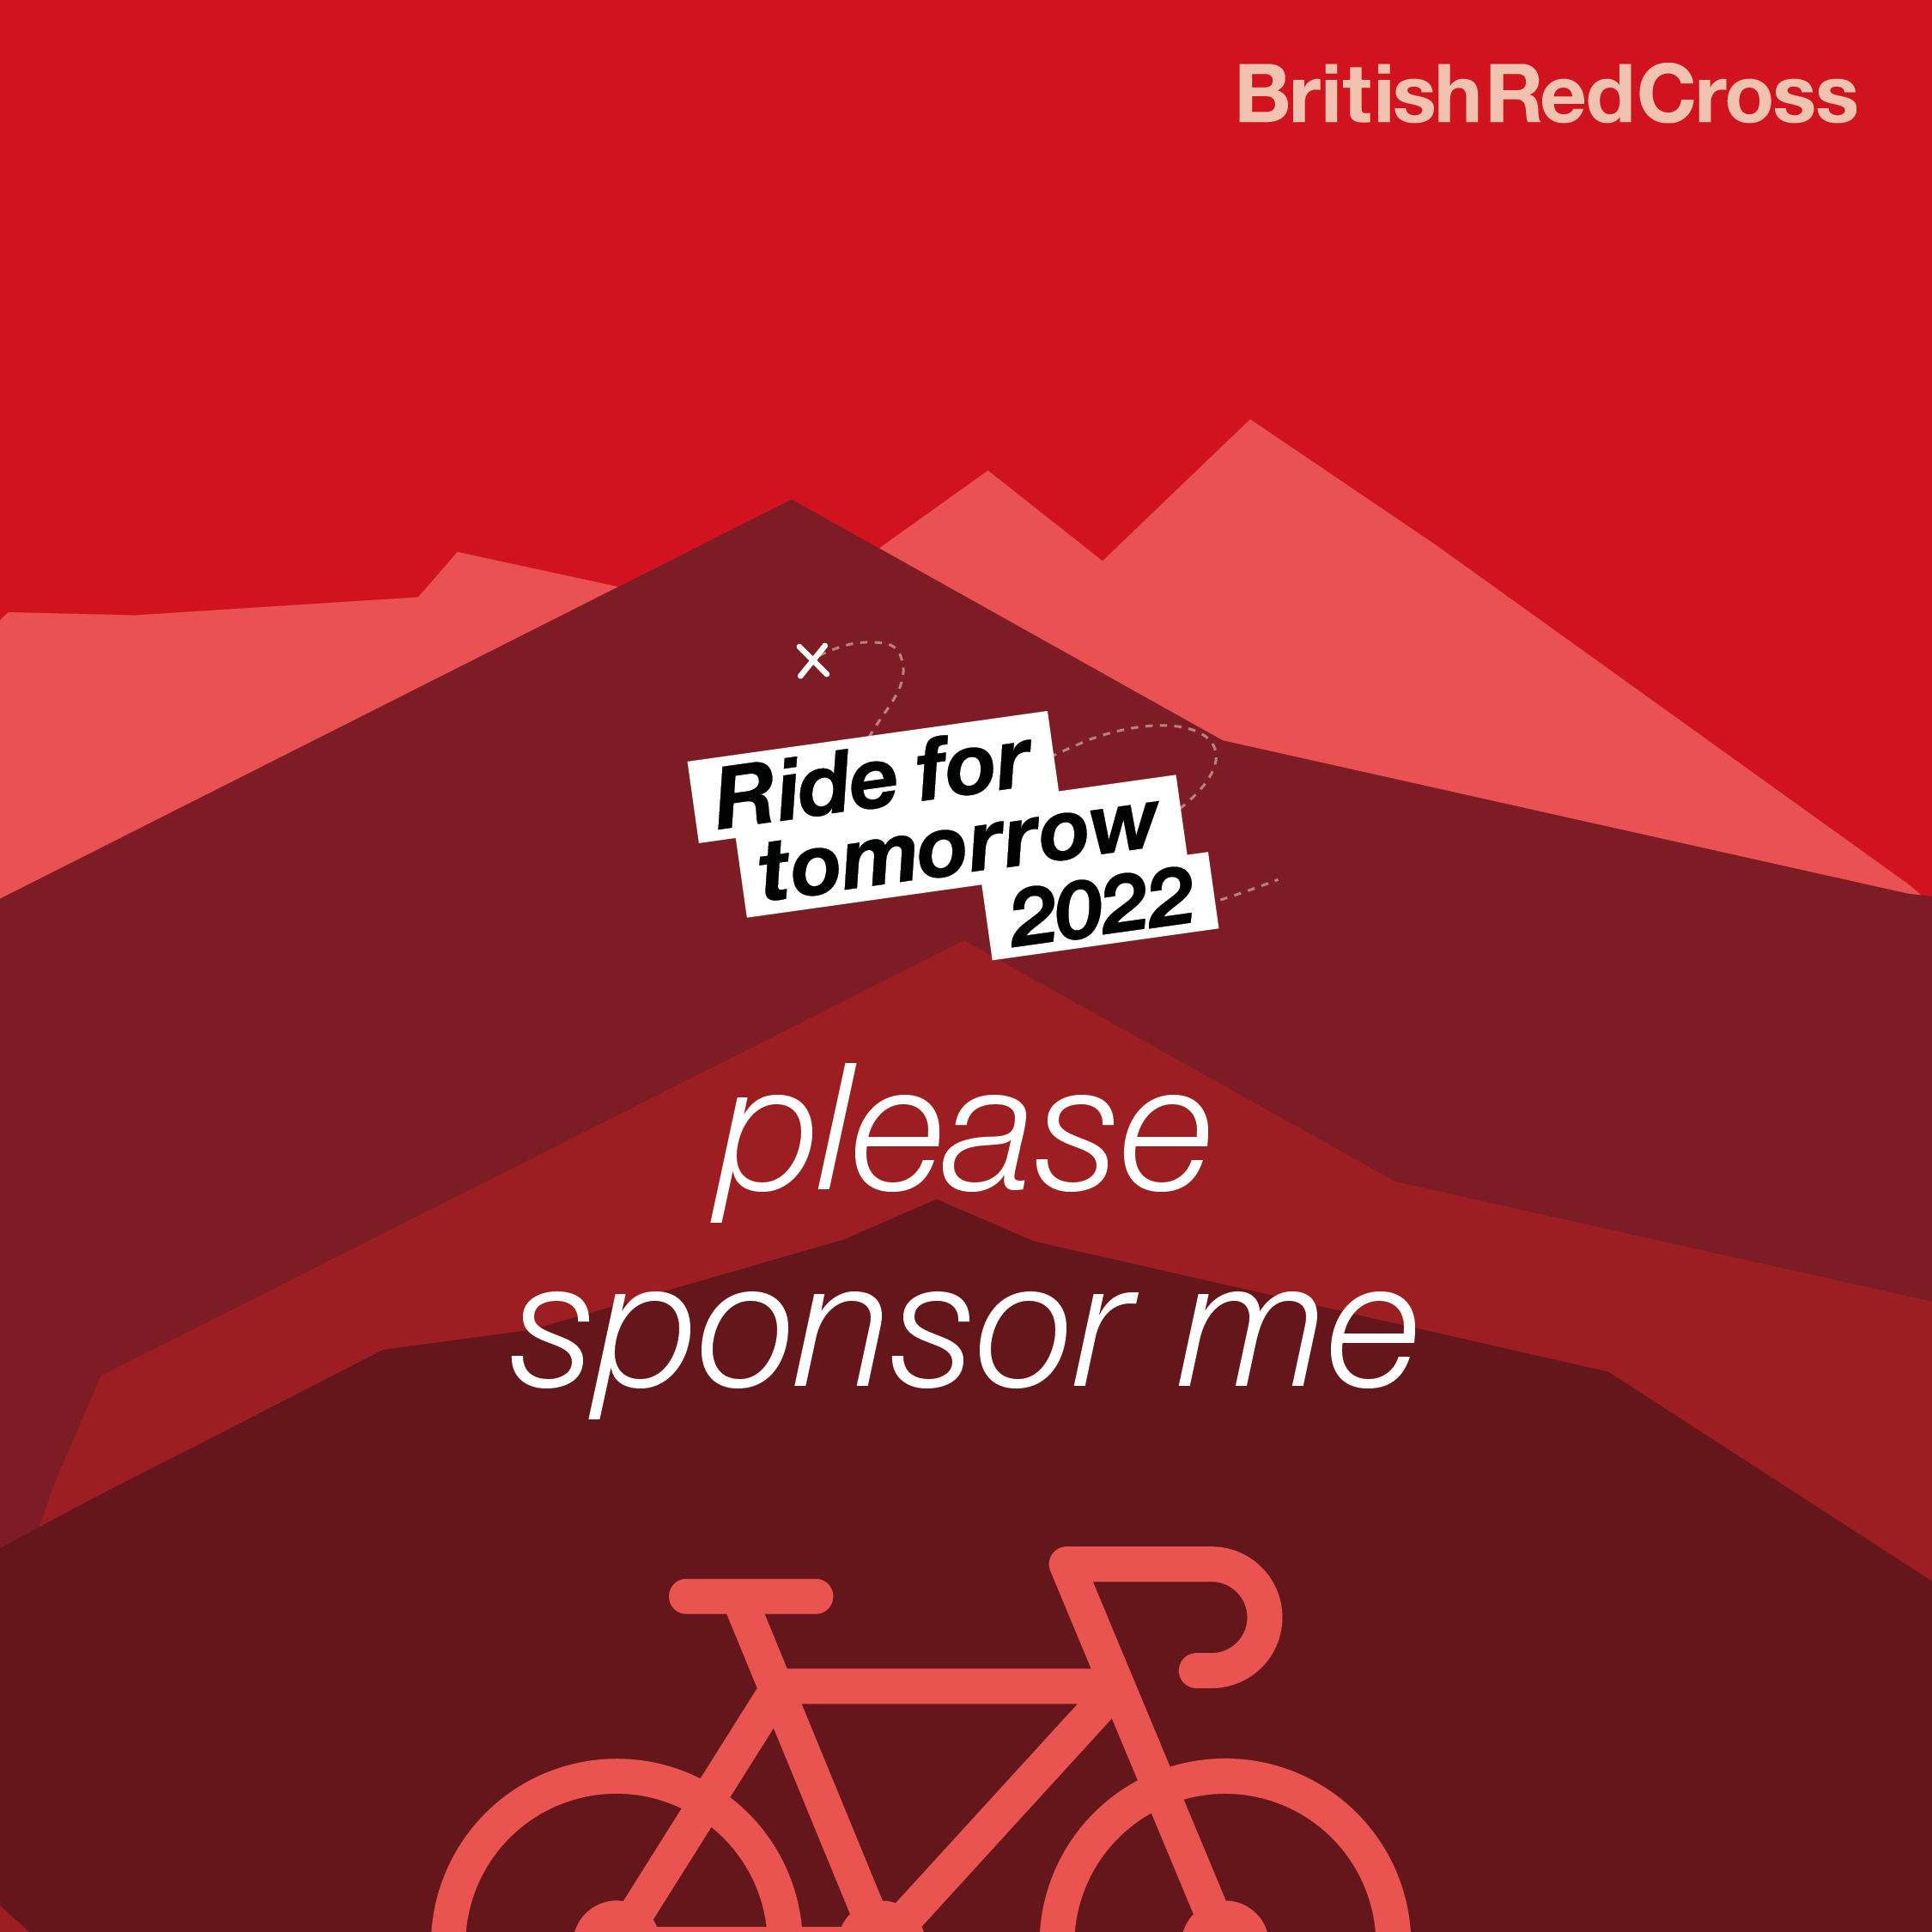 Please sponsor me text above a red bike on a red background with 3 mountain outlines